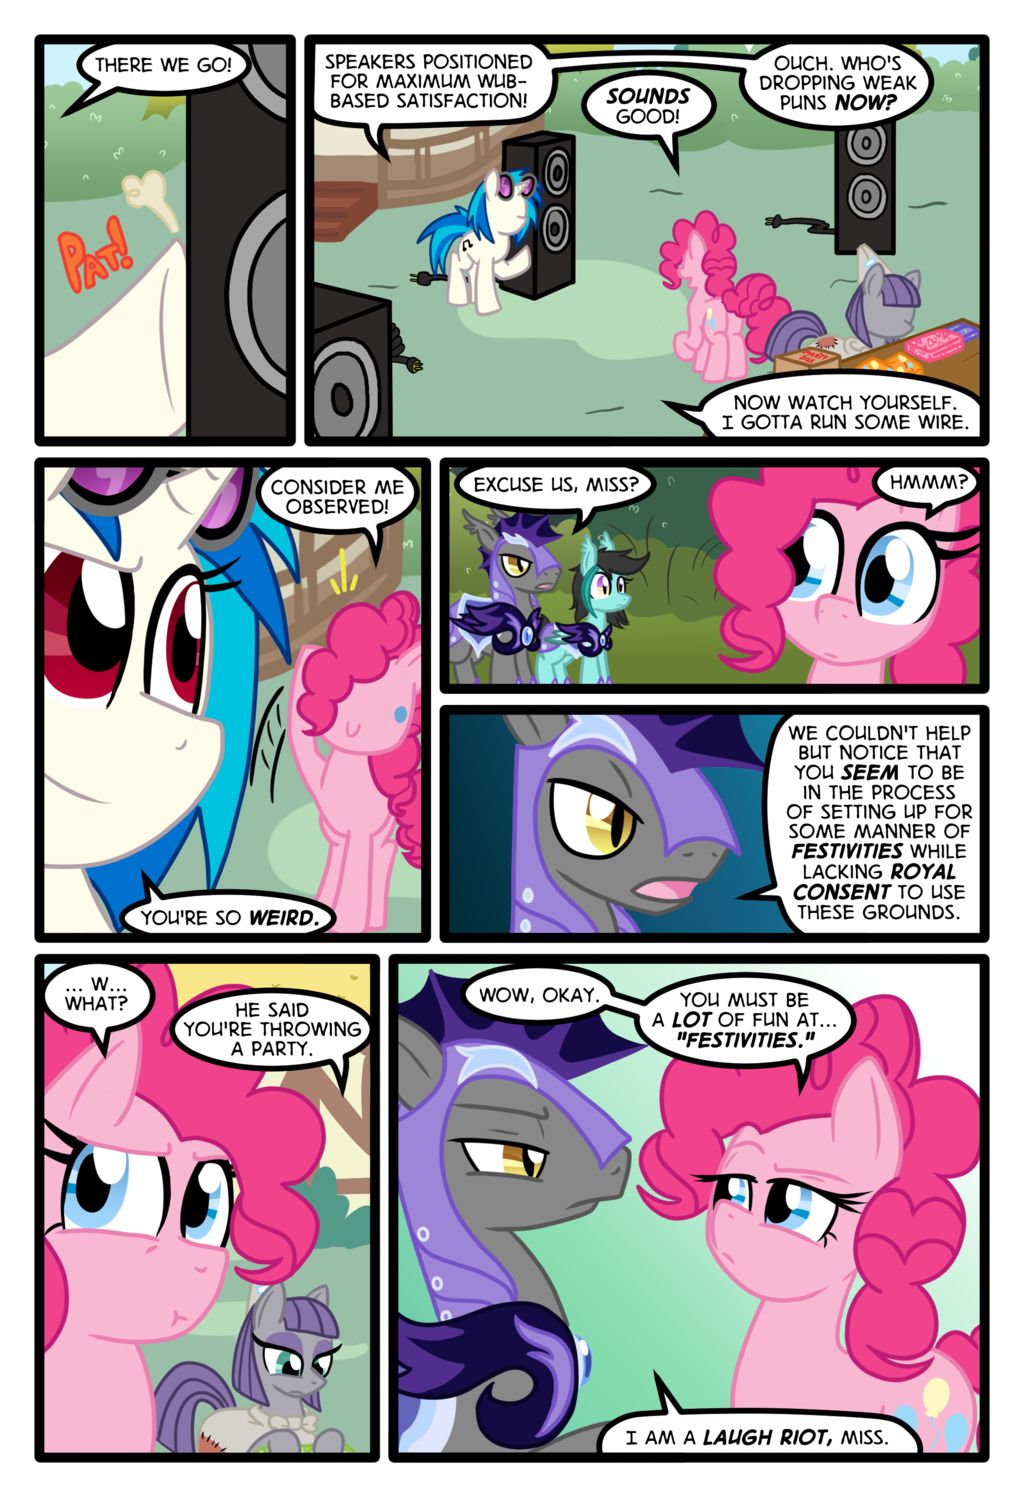 [Zaron] Lonely Hooves (My Little Pony: Friendship is Magic) [English] [Ongoing] 44